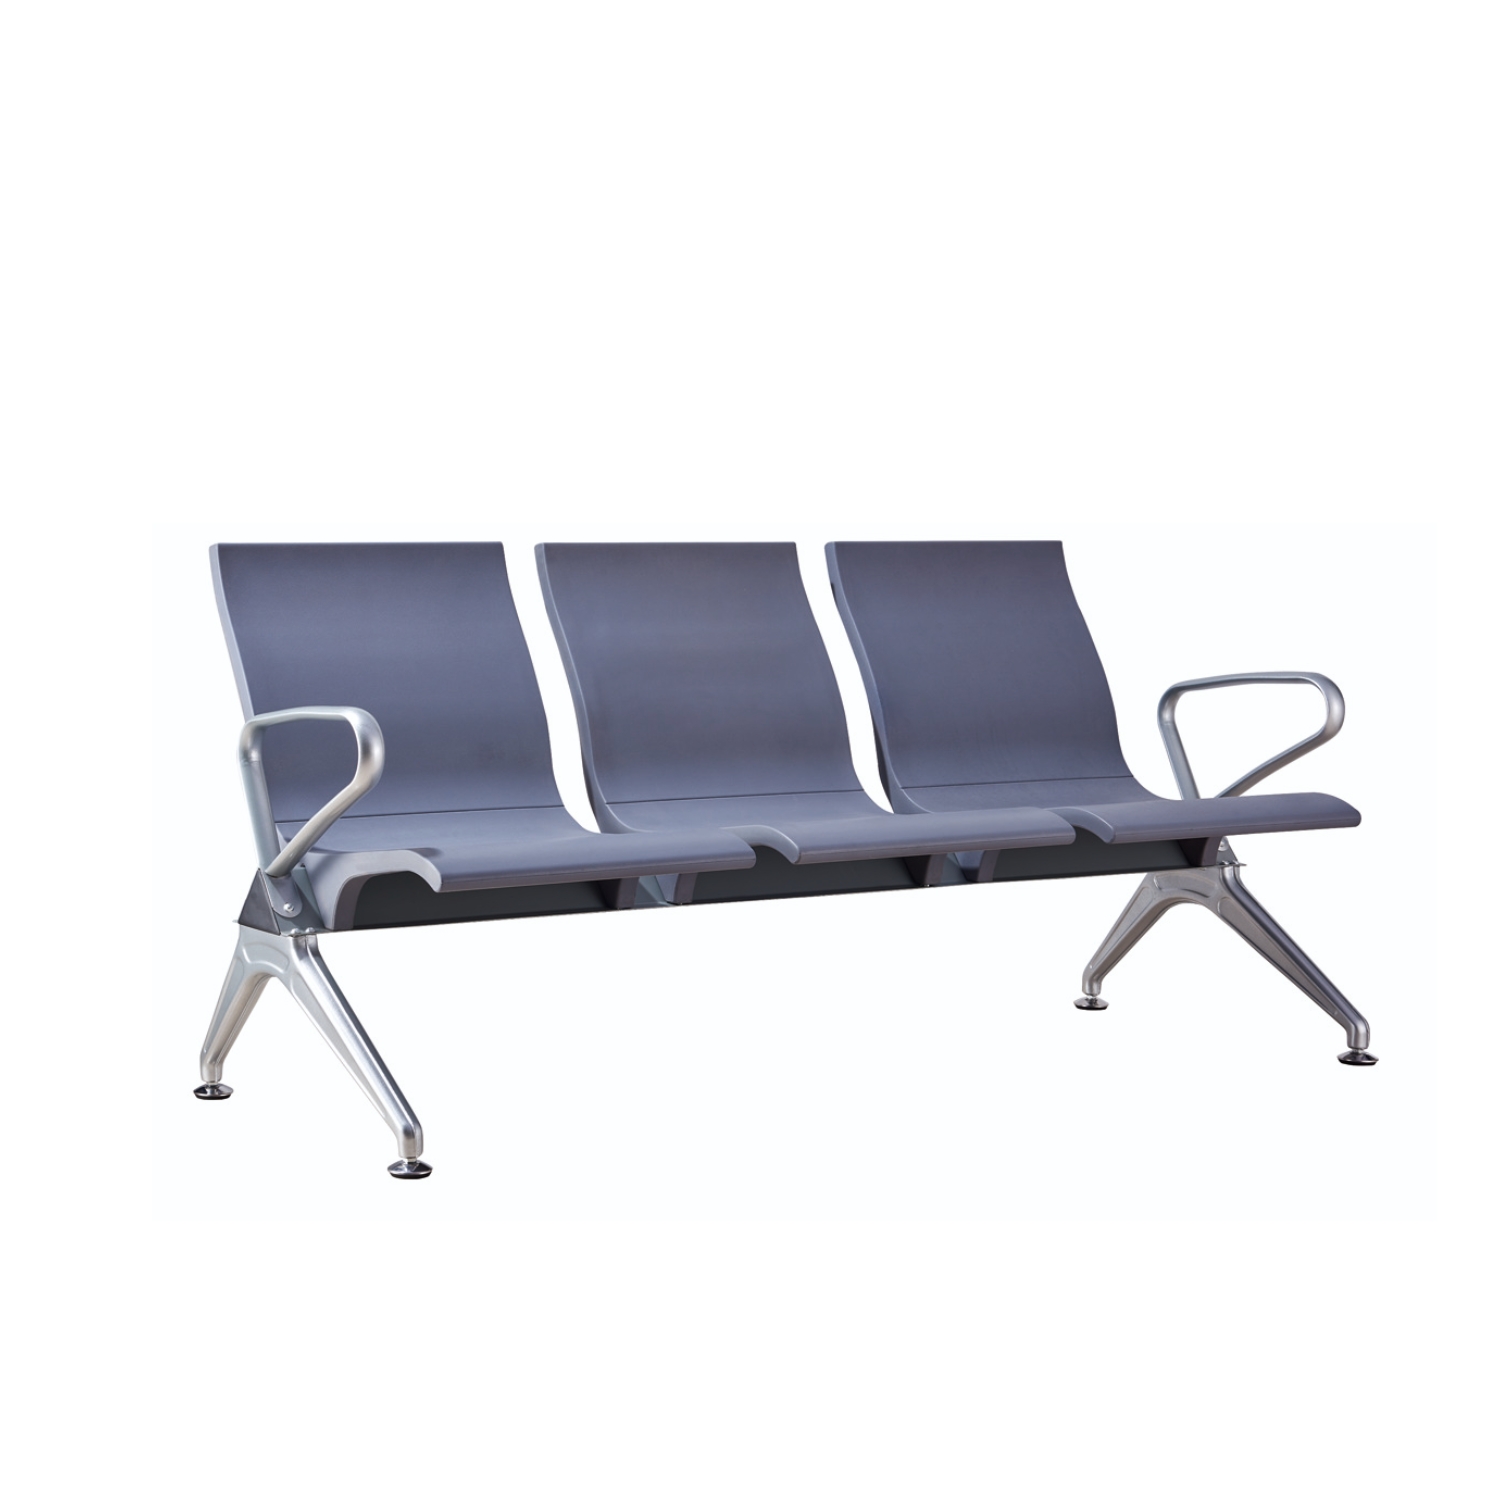 Waiting Seat Customers Airport Office Reception Salon Bench Chair 3-Seat PU Leather Cushion